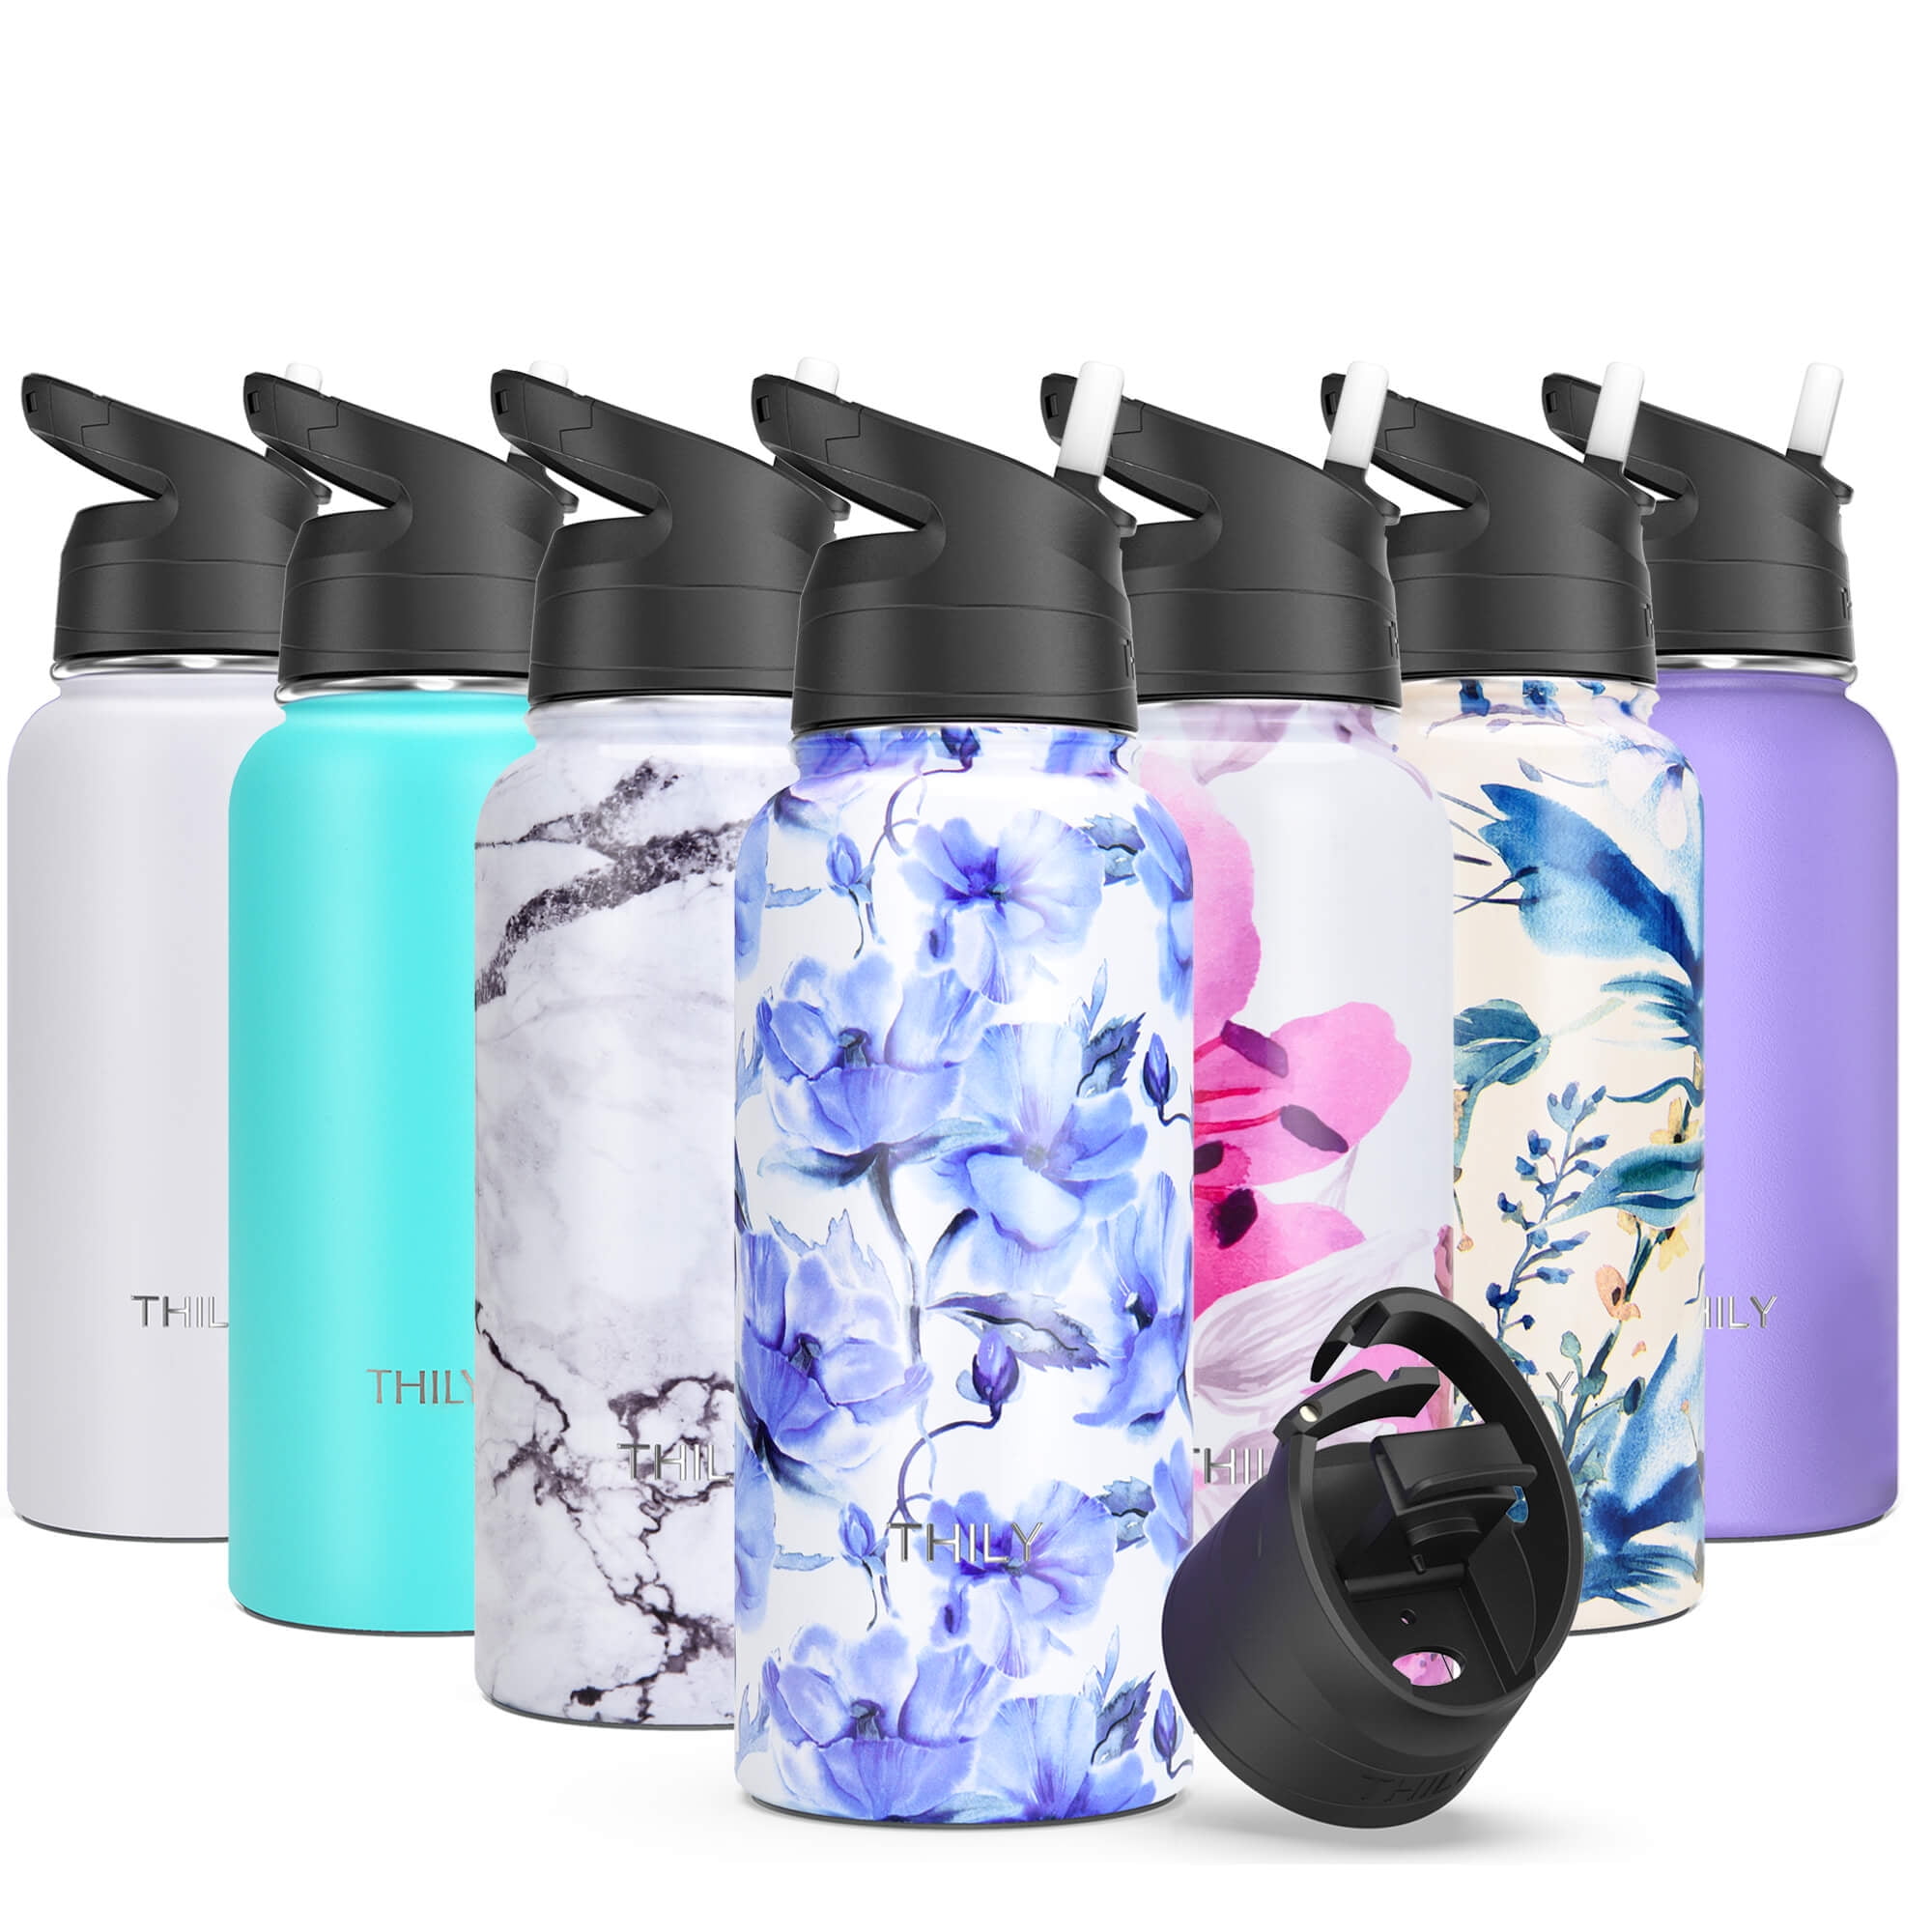 Vacuum Insulated Sports Water Bottle - THILY 32 oz Stainless Steel Leakproof Wide Mouth Water Flask with Flip Lid and Straw Lid, Keep Hot 12 Hours